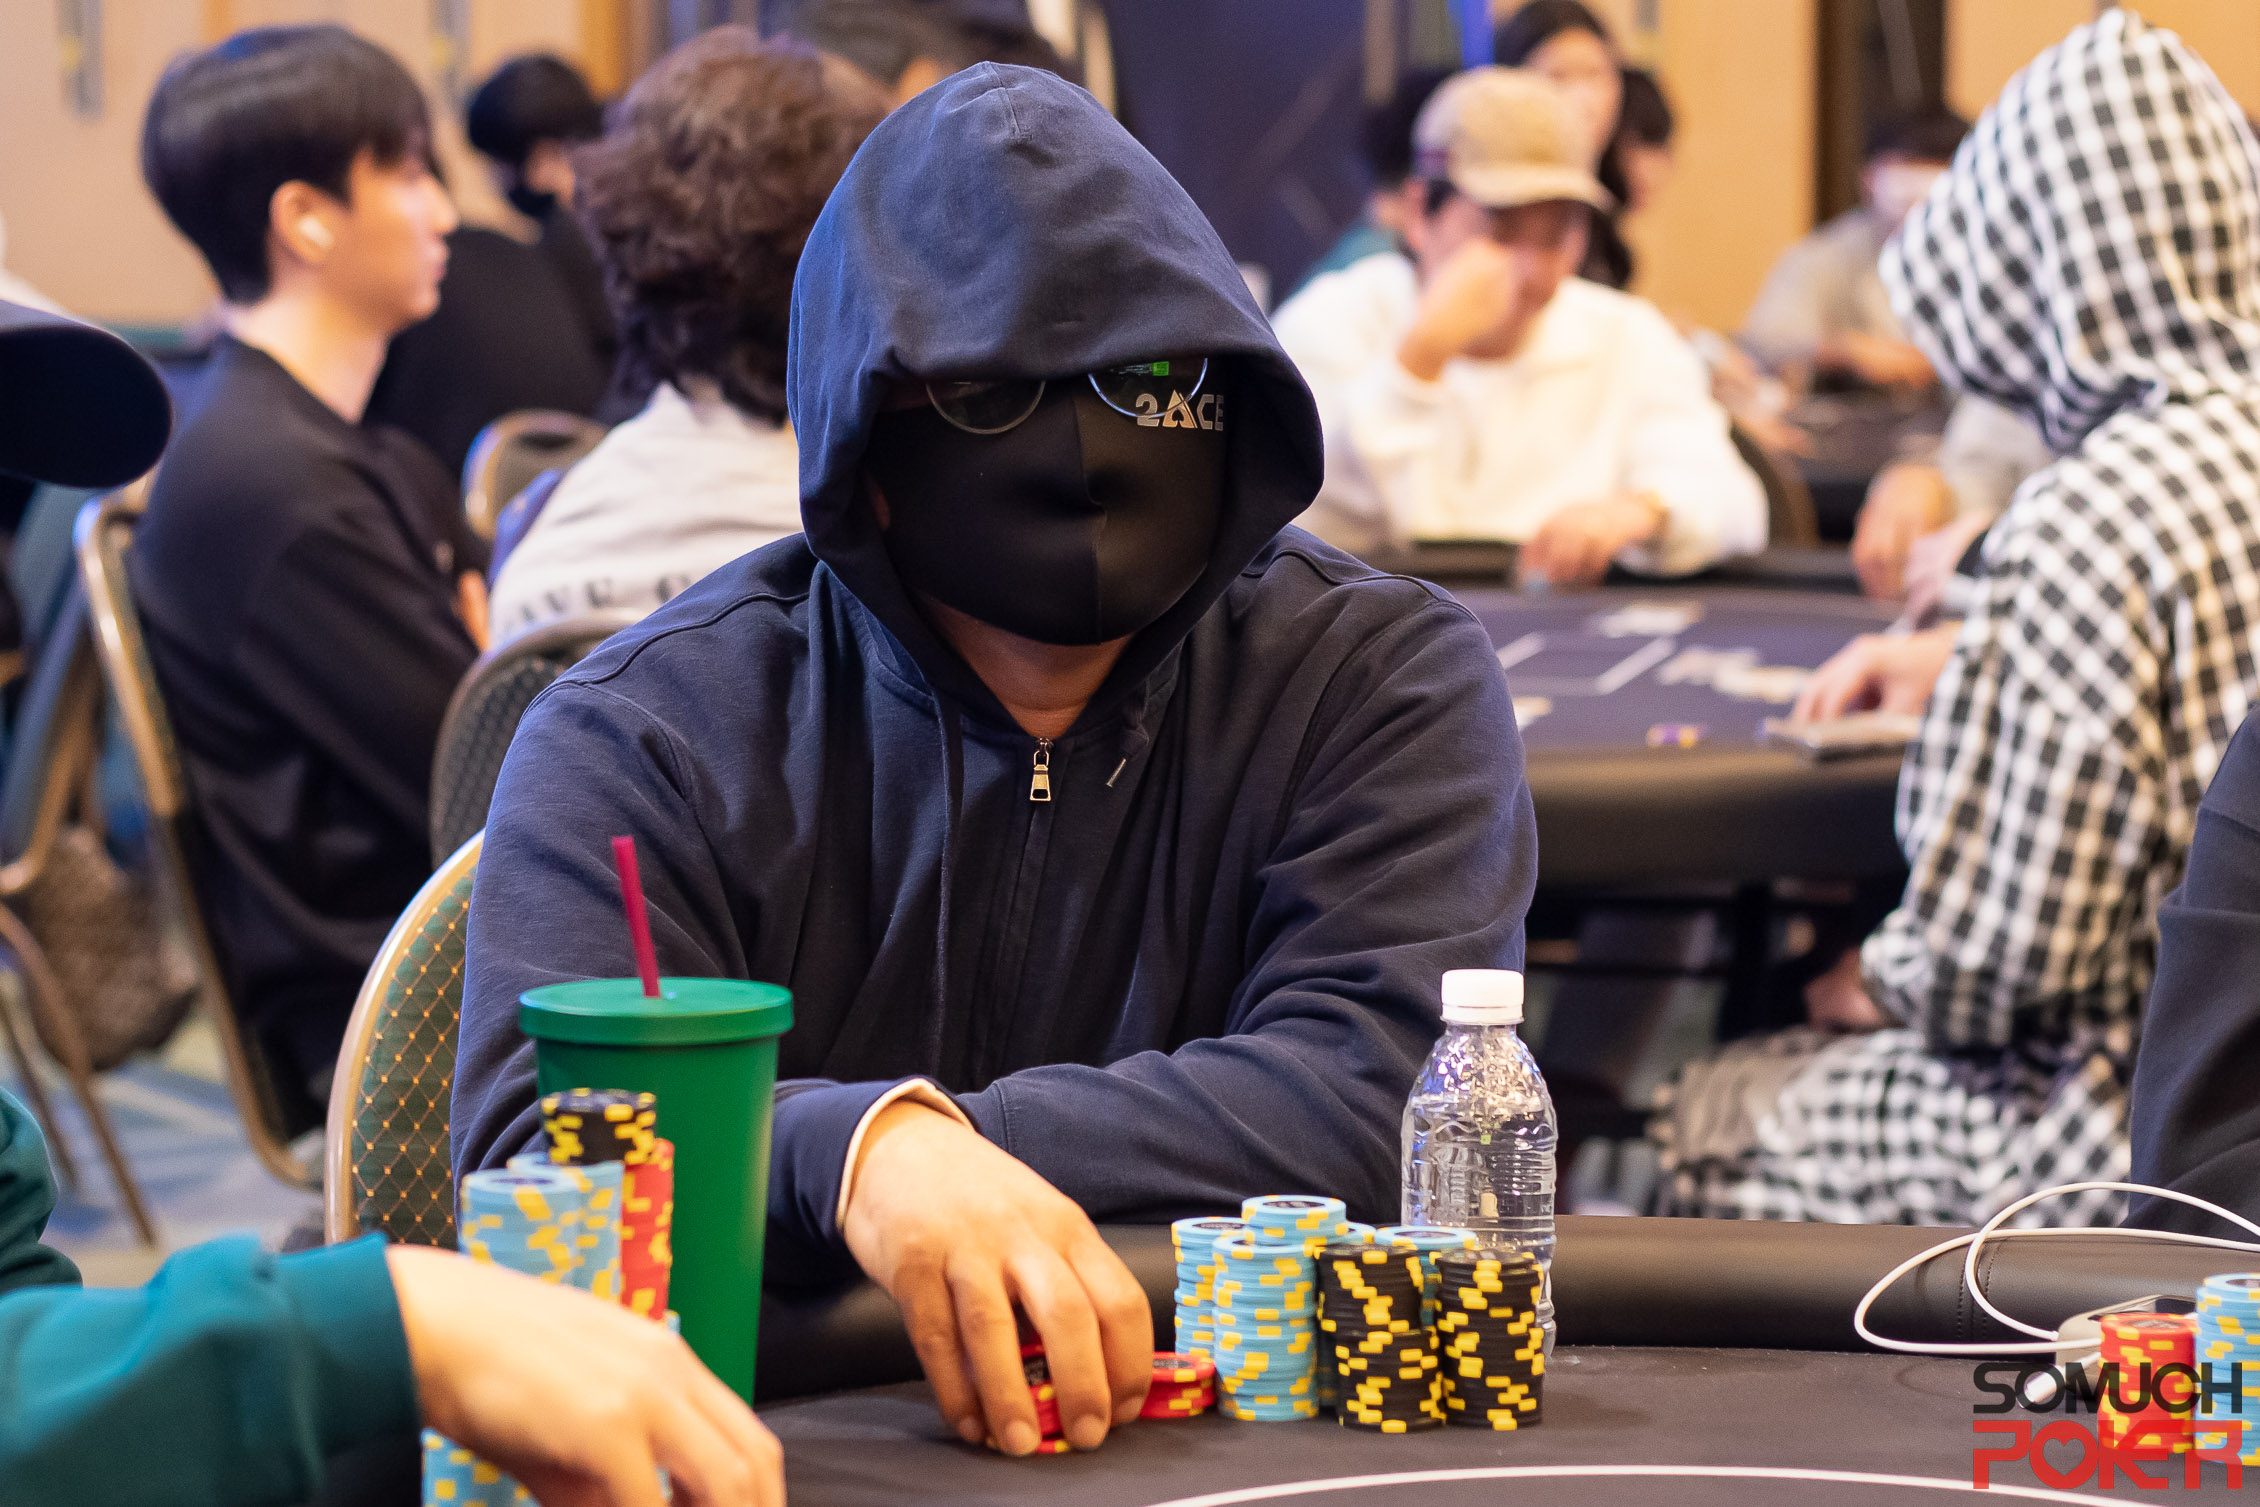 Ace Poker League Seoul: From 2,737 entries down to the final 56 players! Kim Kee Yong leads the race; SHR draws 209 entries